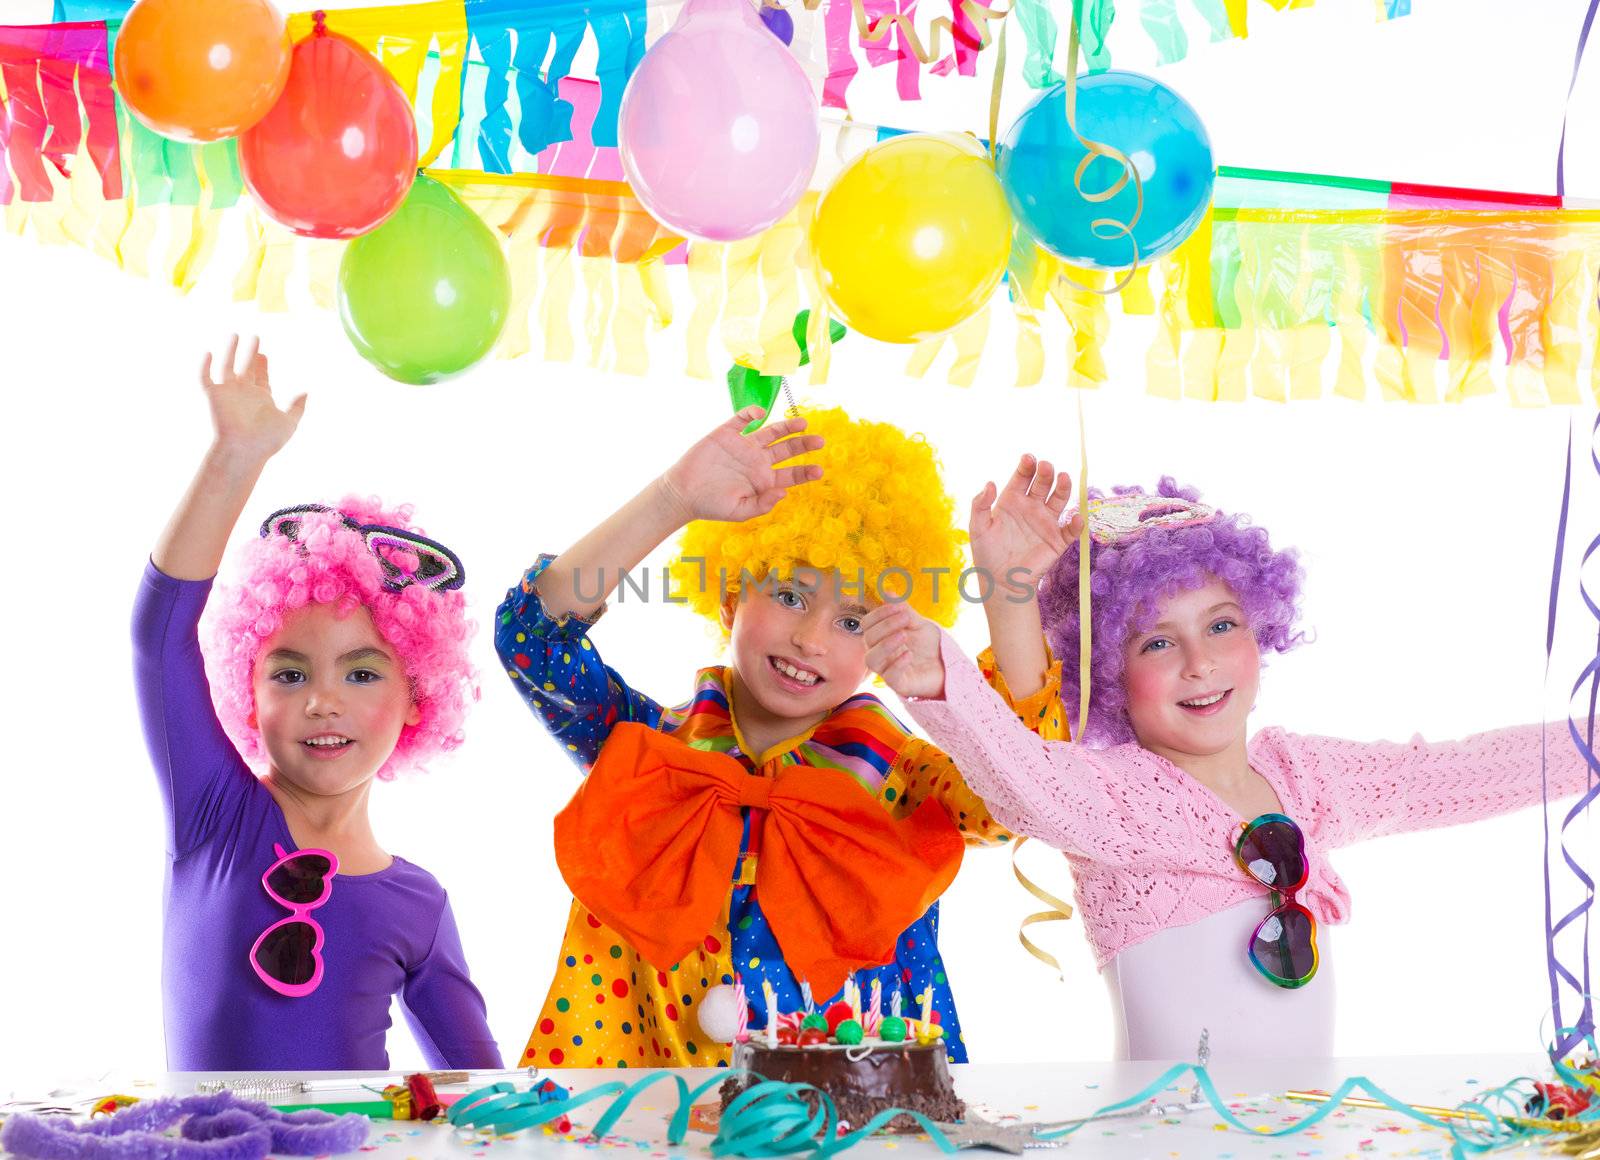 Children happy birthday party with clown wigs and chocolate cake